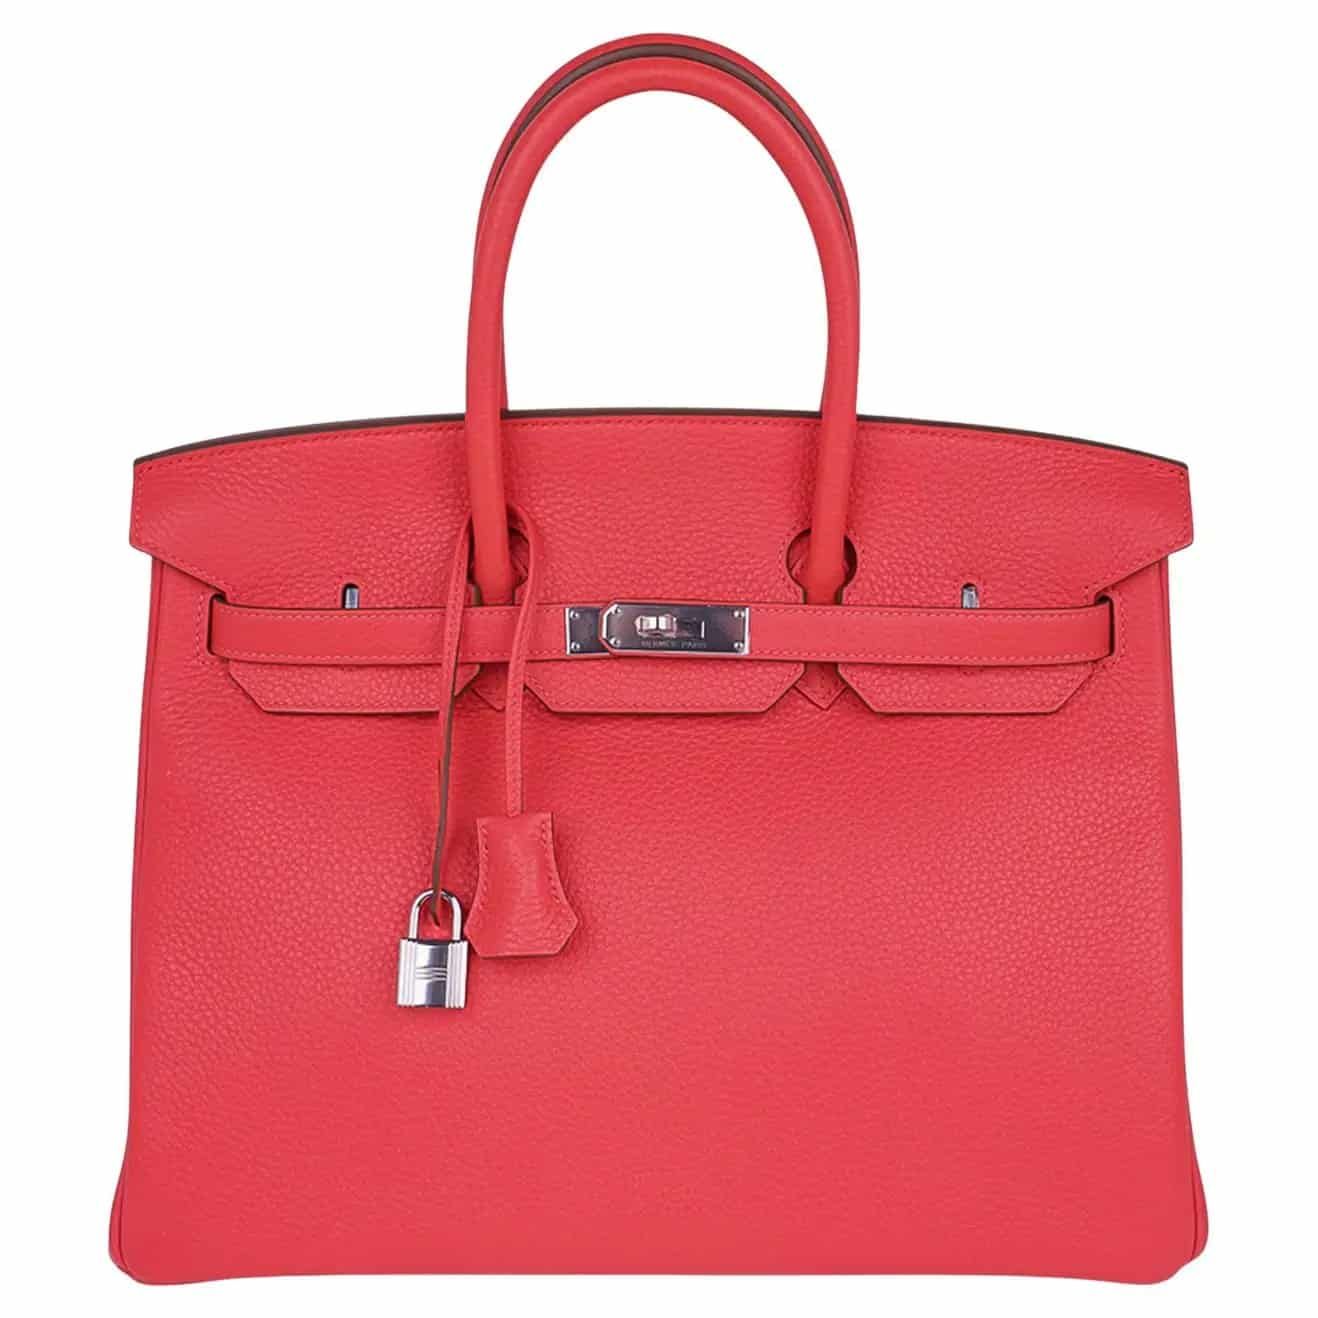 Faux Real - How to spot a real Hermès Birkin Bag!, The Hermès Birkin Bag  put to the test. We'll check the most important authenticity features for  you!